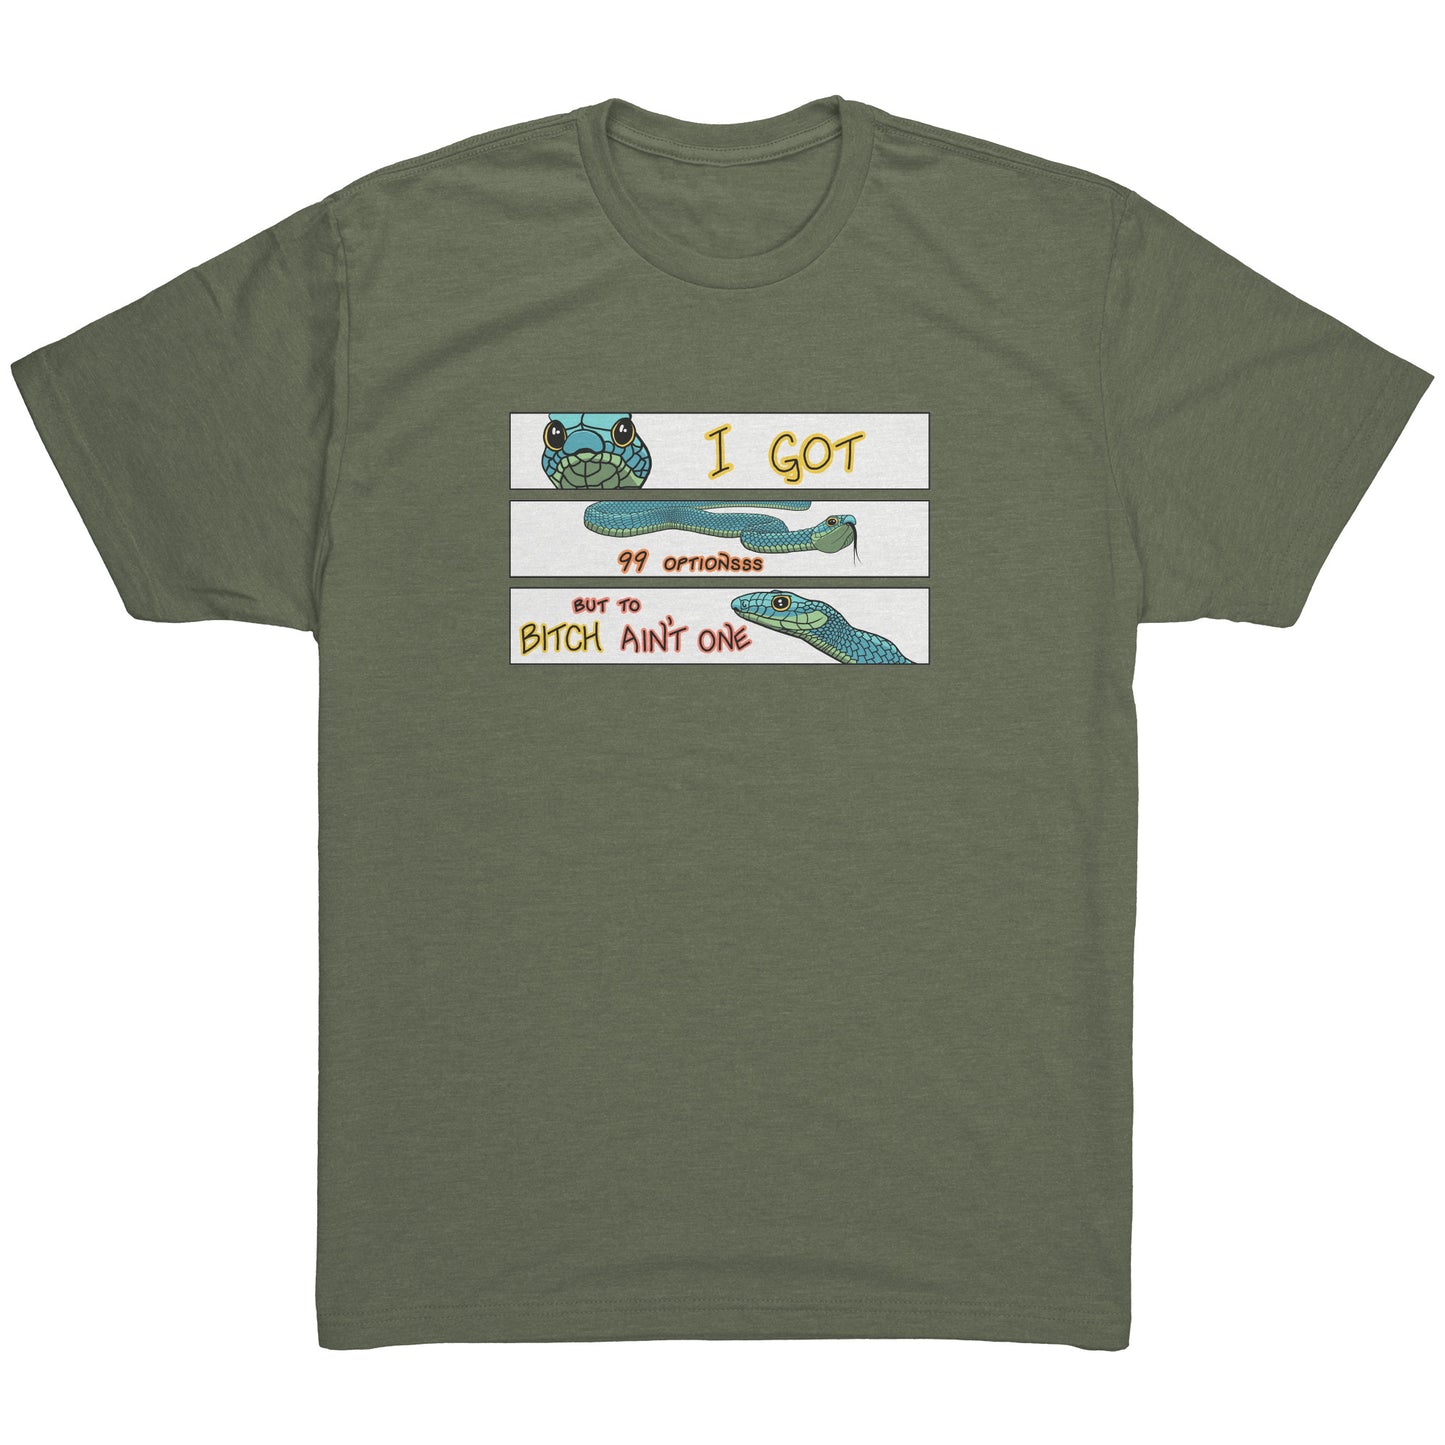 Military Green Next Level Men's Triblend shirt with short sleeves, a set-in 1x1 baby rib collar made with 50/25/25 blend of polyester/combed ring spun cotton/rayon fabric with three images of a cartoon snake in comic strip form with the lettered phrase: I got 99 options but to bitch ain't one. The snake is various shades of blue and green. The background of the snake is solid white. The tee comes in sizes small, medium, large, extra large, 2XL, and 3XL.